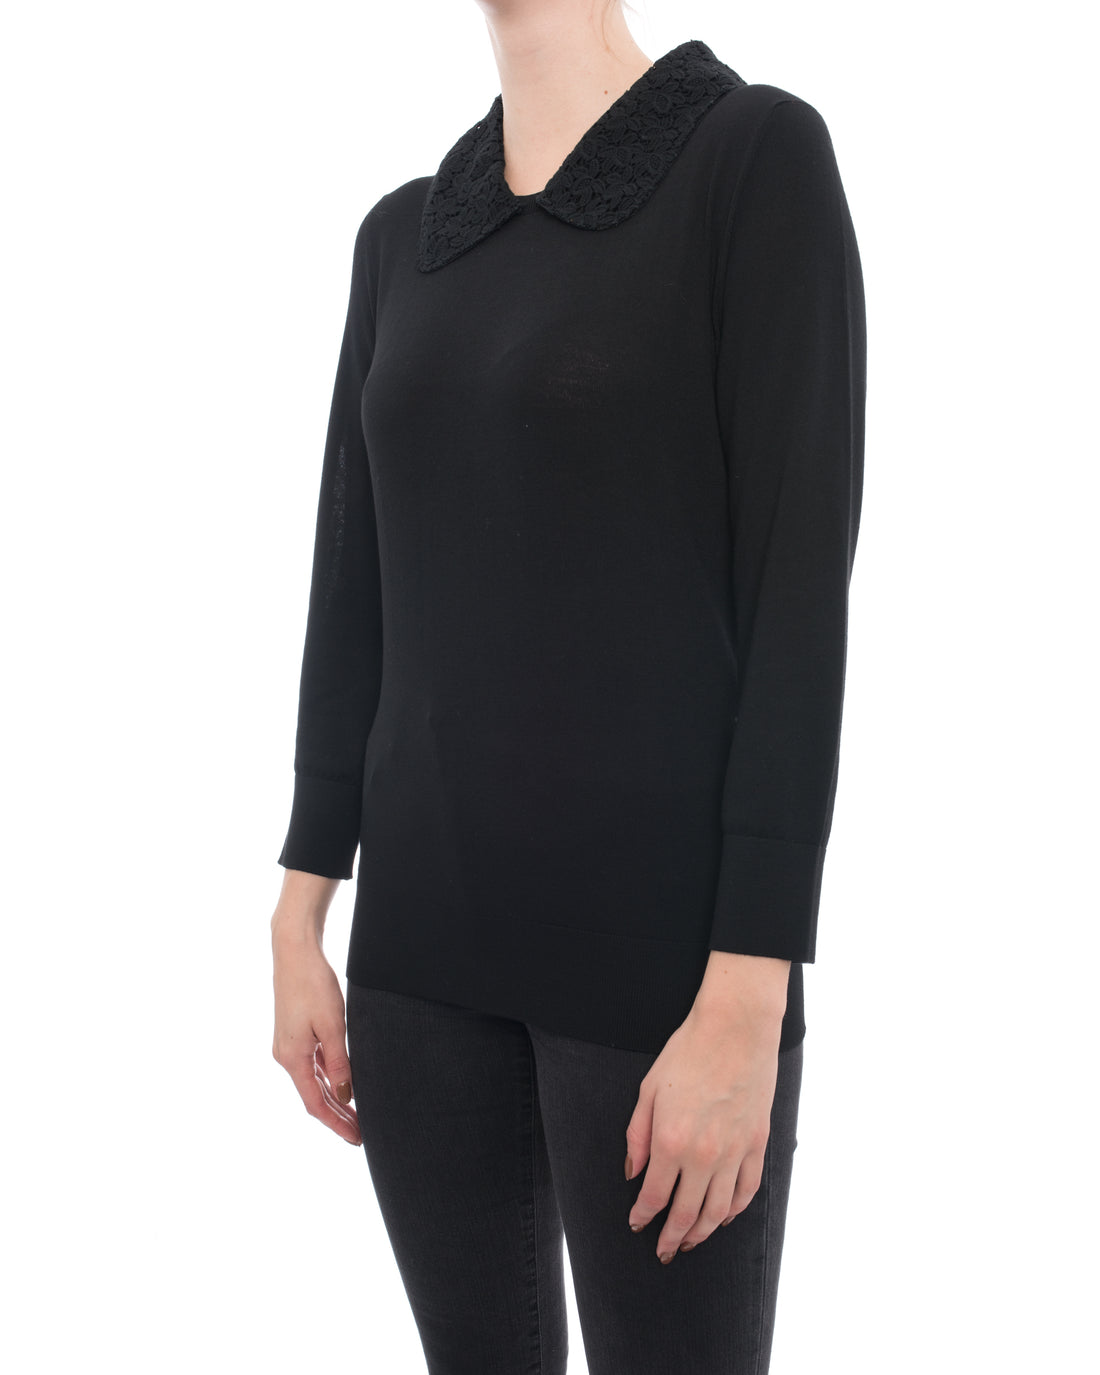 Dolce Gabbana Black Knit Long Sleeve Sweater with Lace Collar - 8